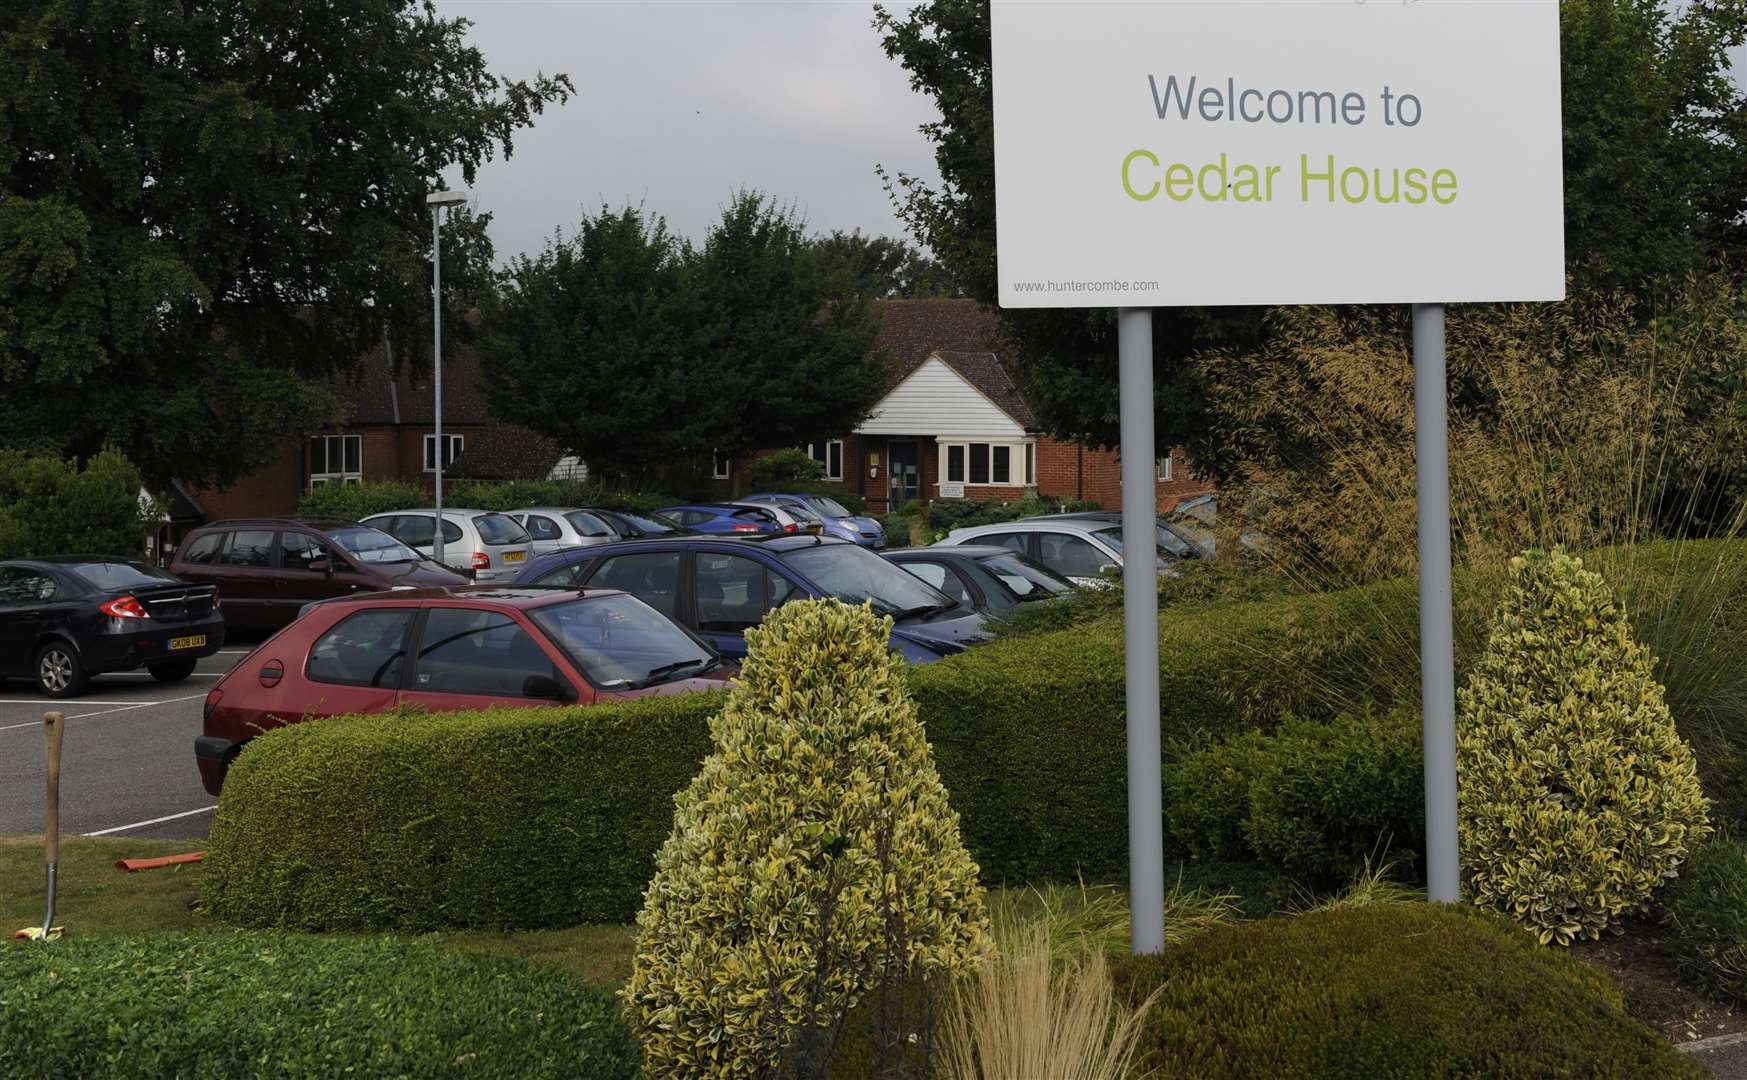 The Care Quality Commission has published a damning report about care delivered to mental health patients at Cedar House